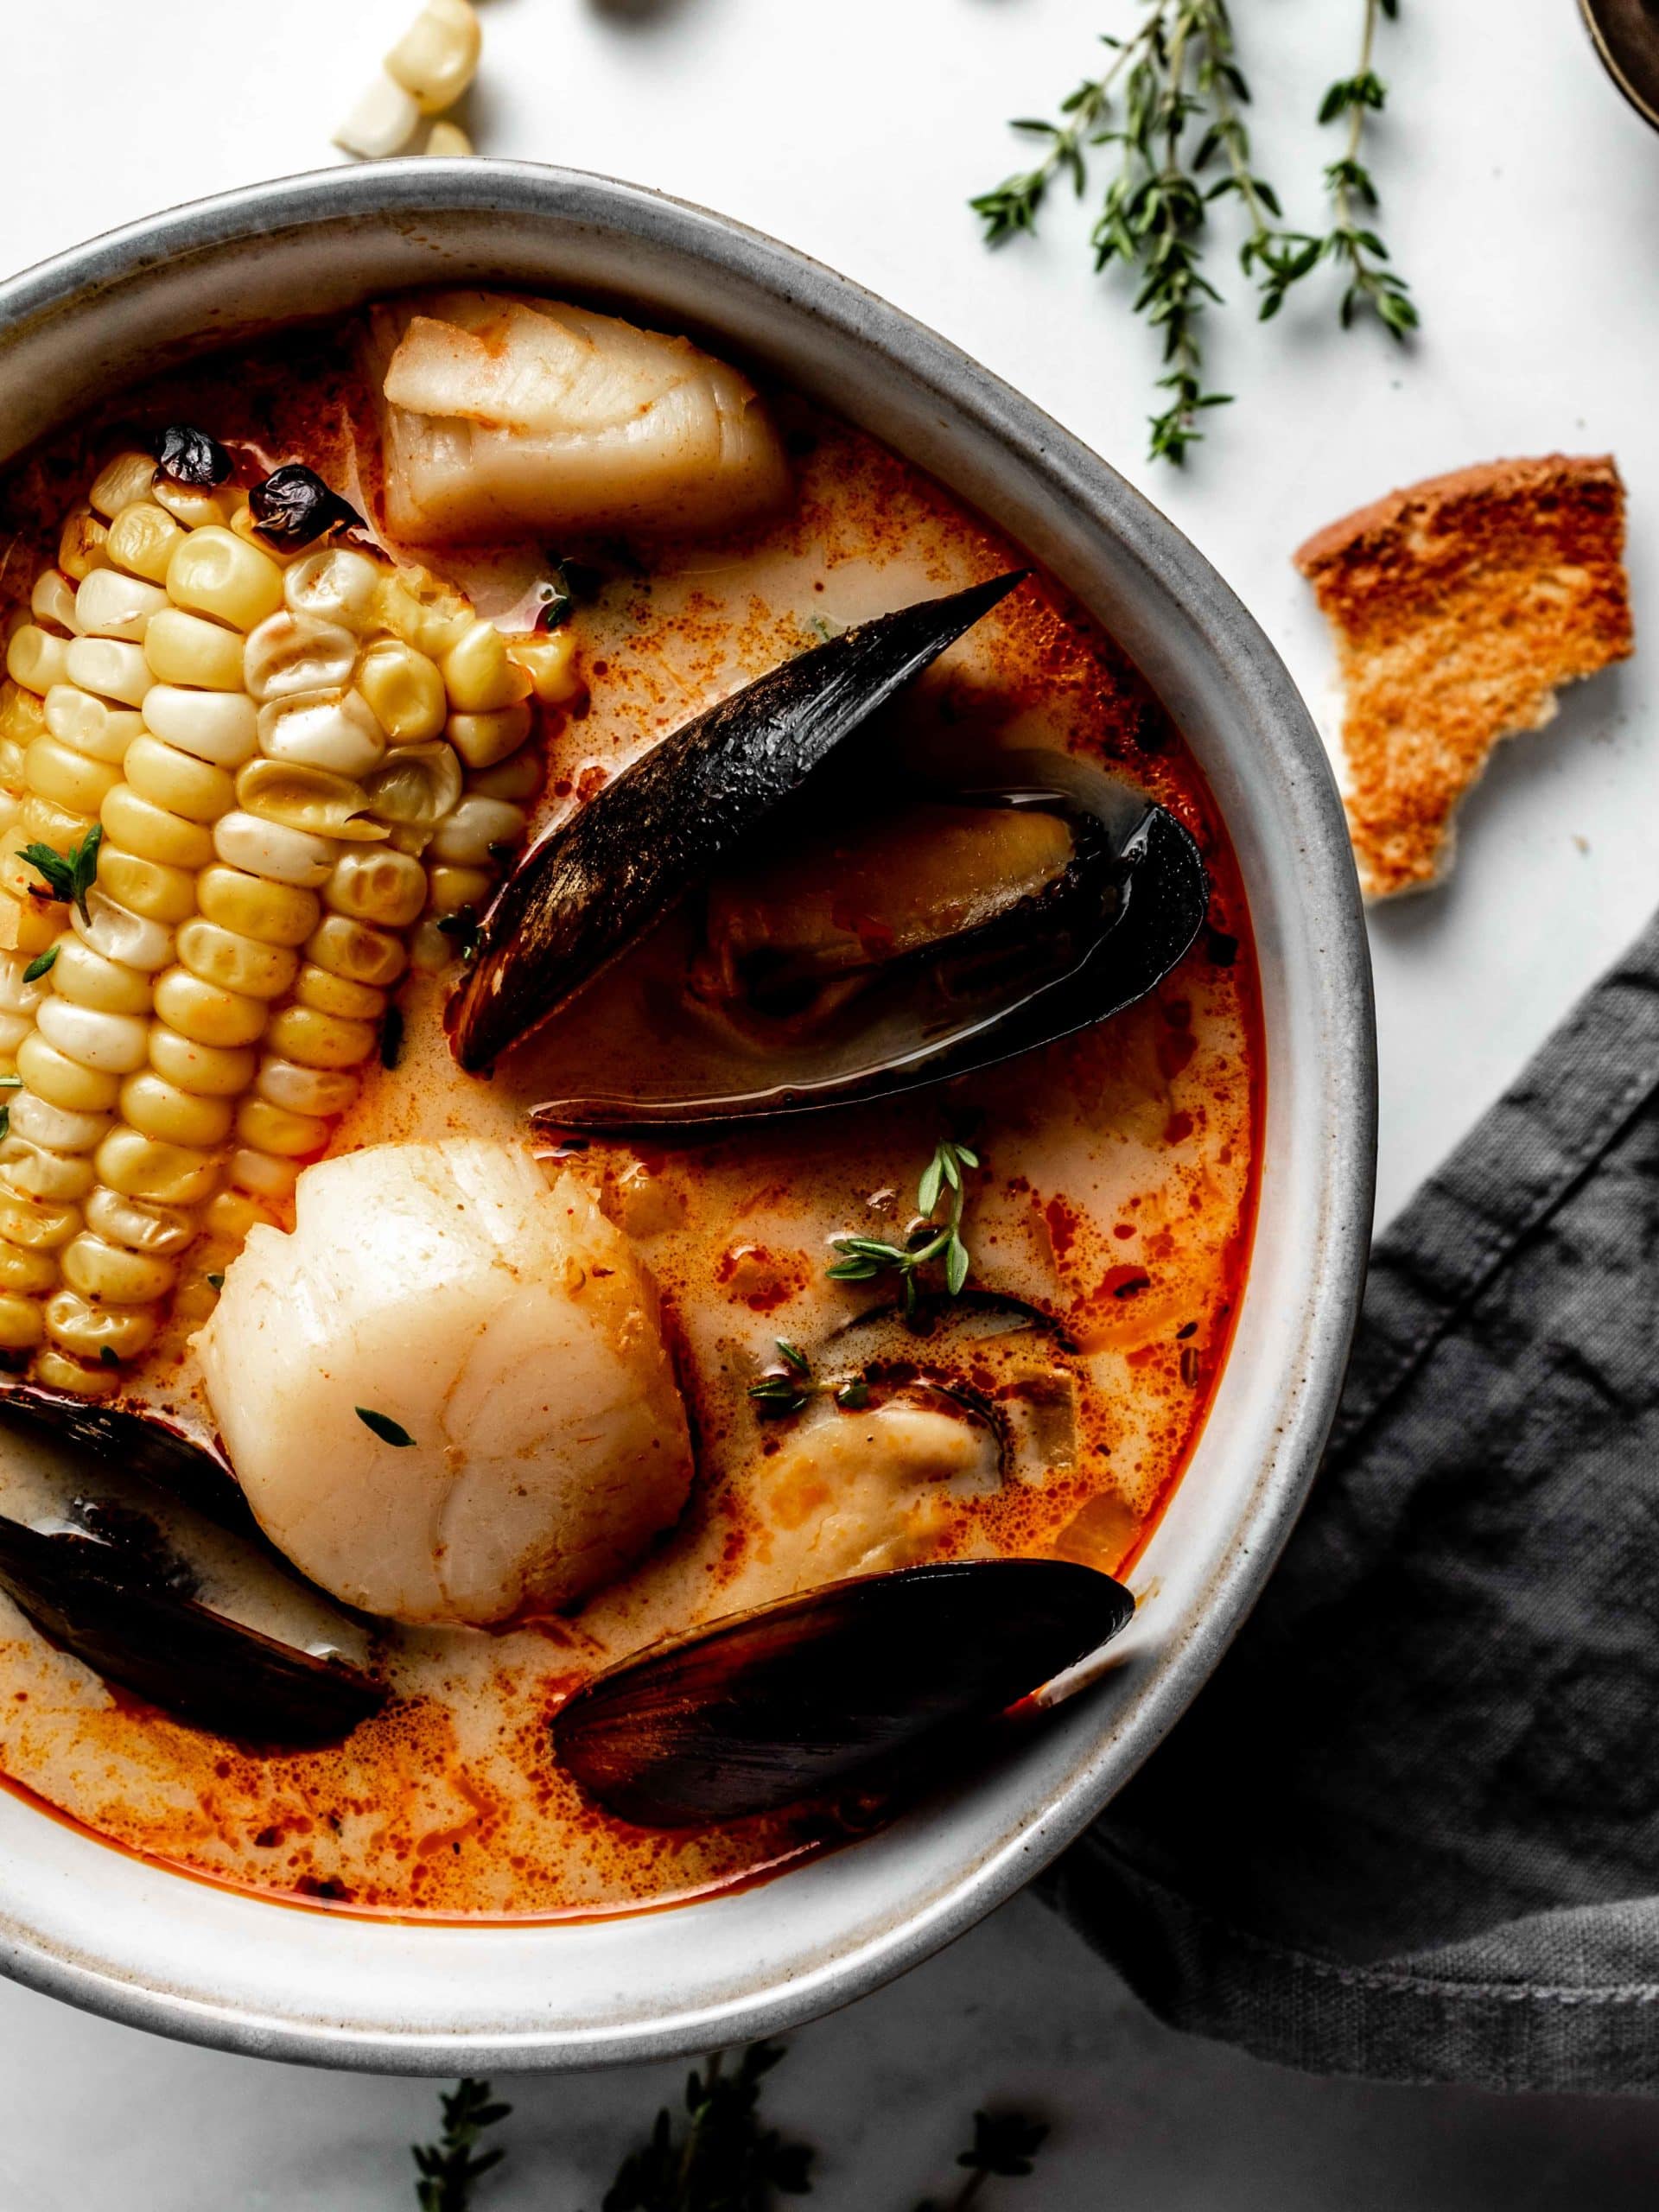 bowl of soup with corn on the cob, mussels, scallops and shrimp